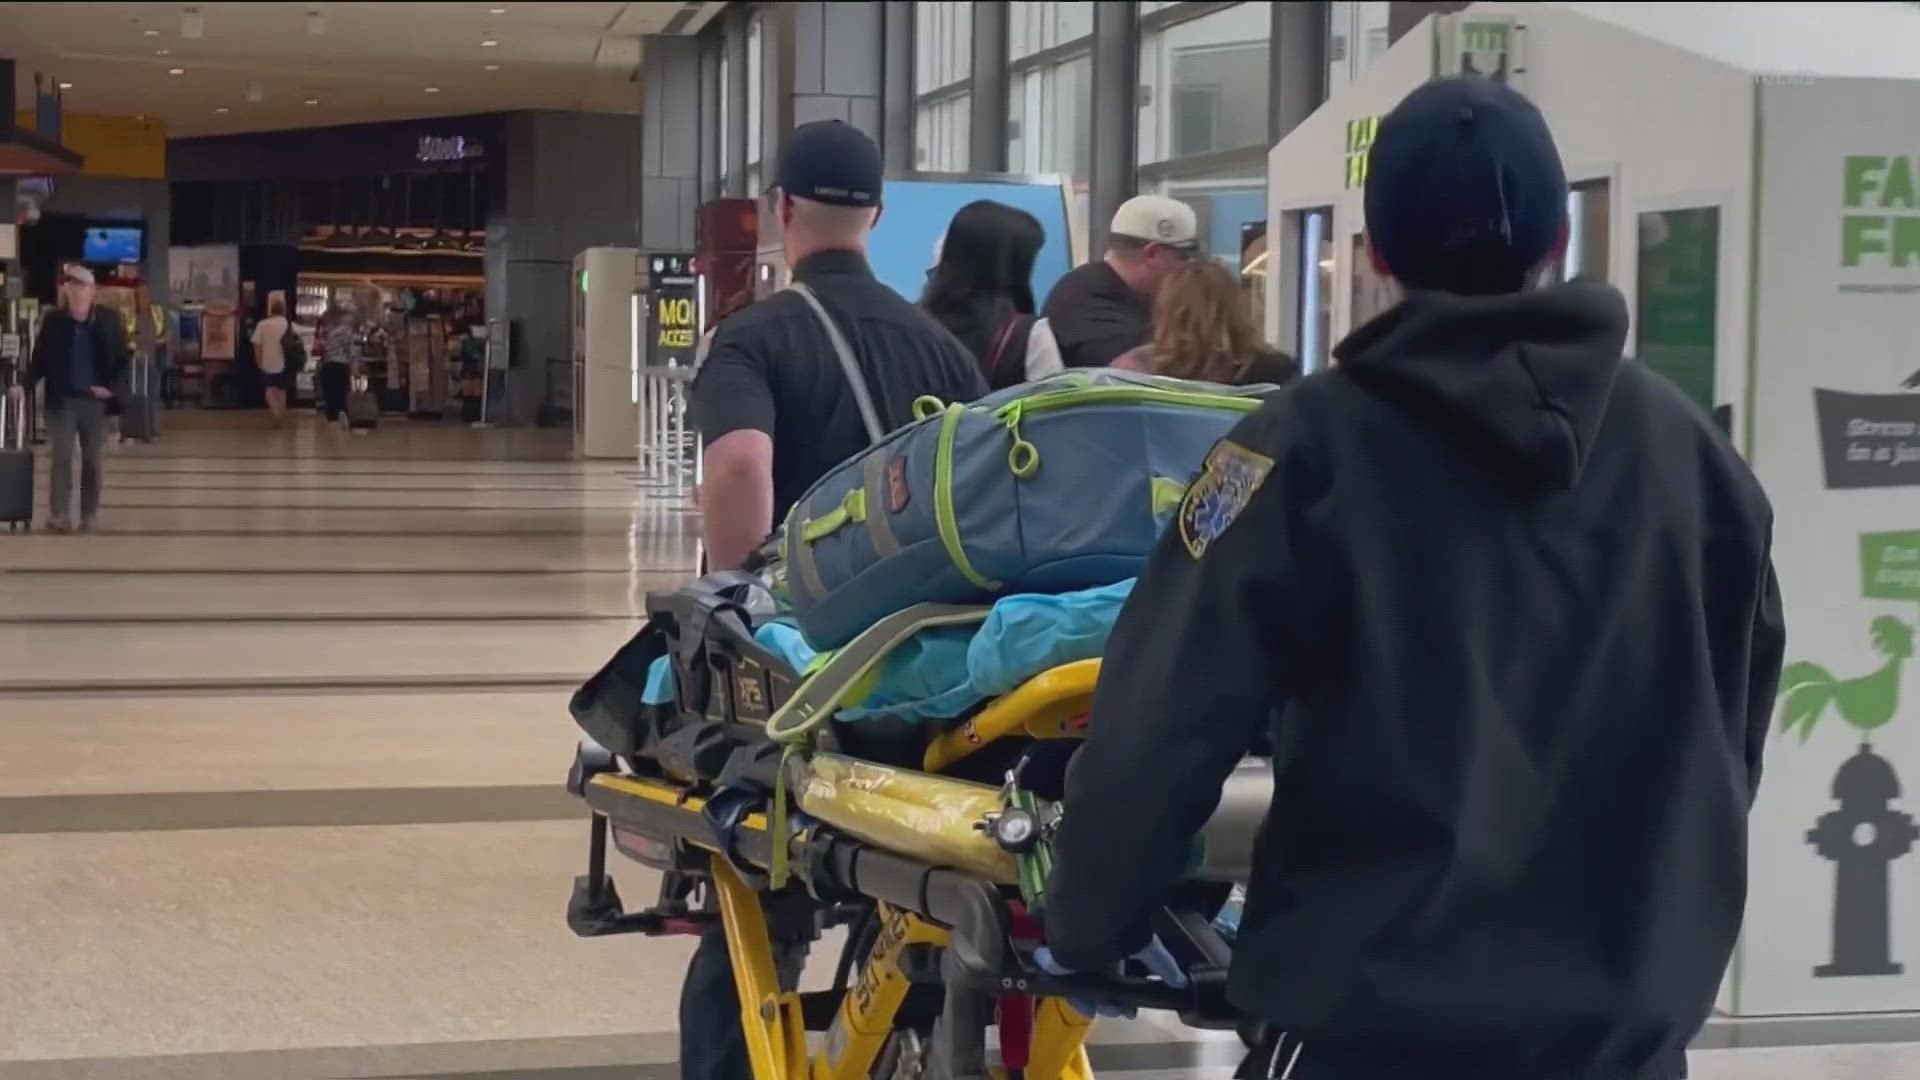 Local medics will now be stationed in the main terminal at Austin's airport. It will help ATCEMS respond faster if anyone needs medical help.